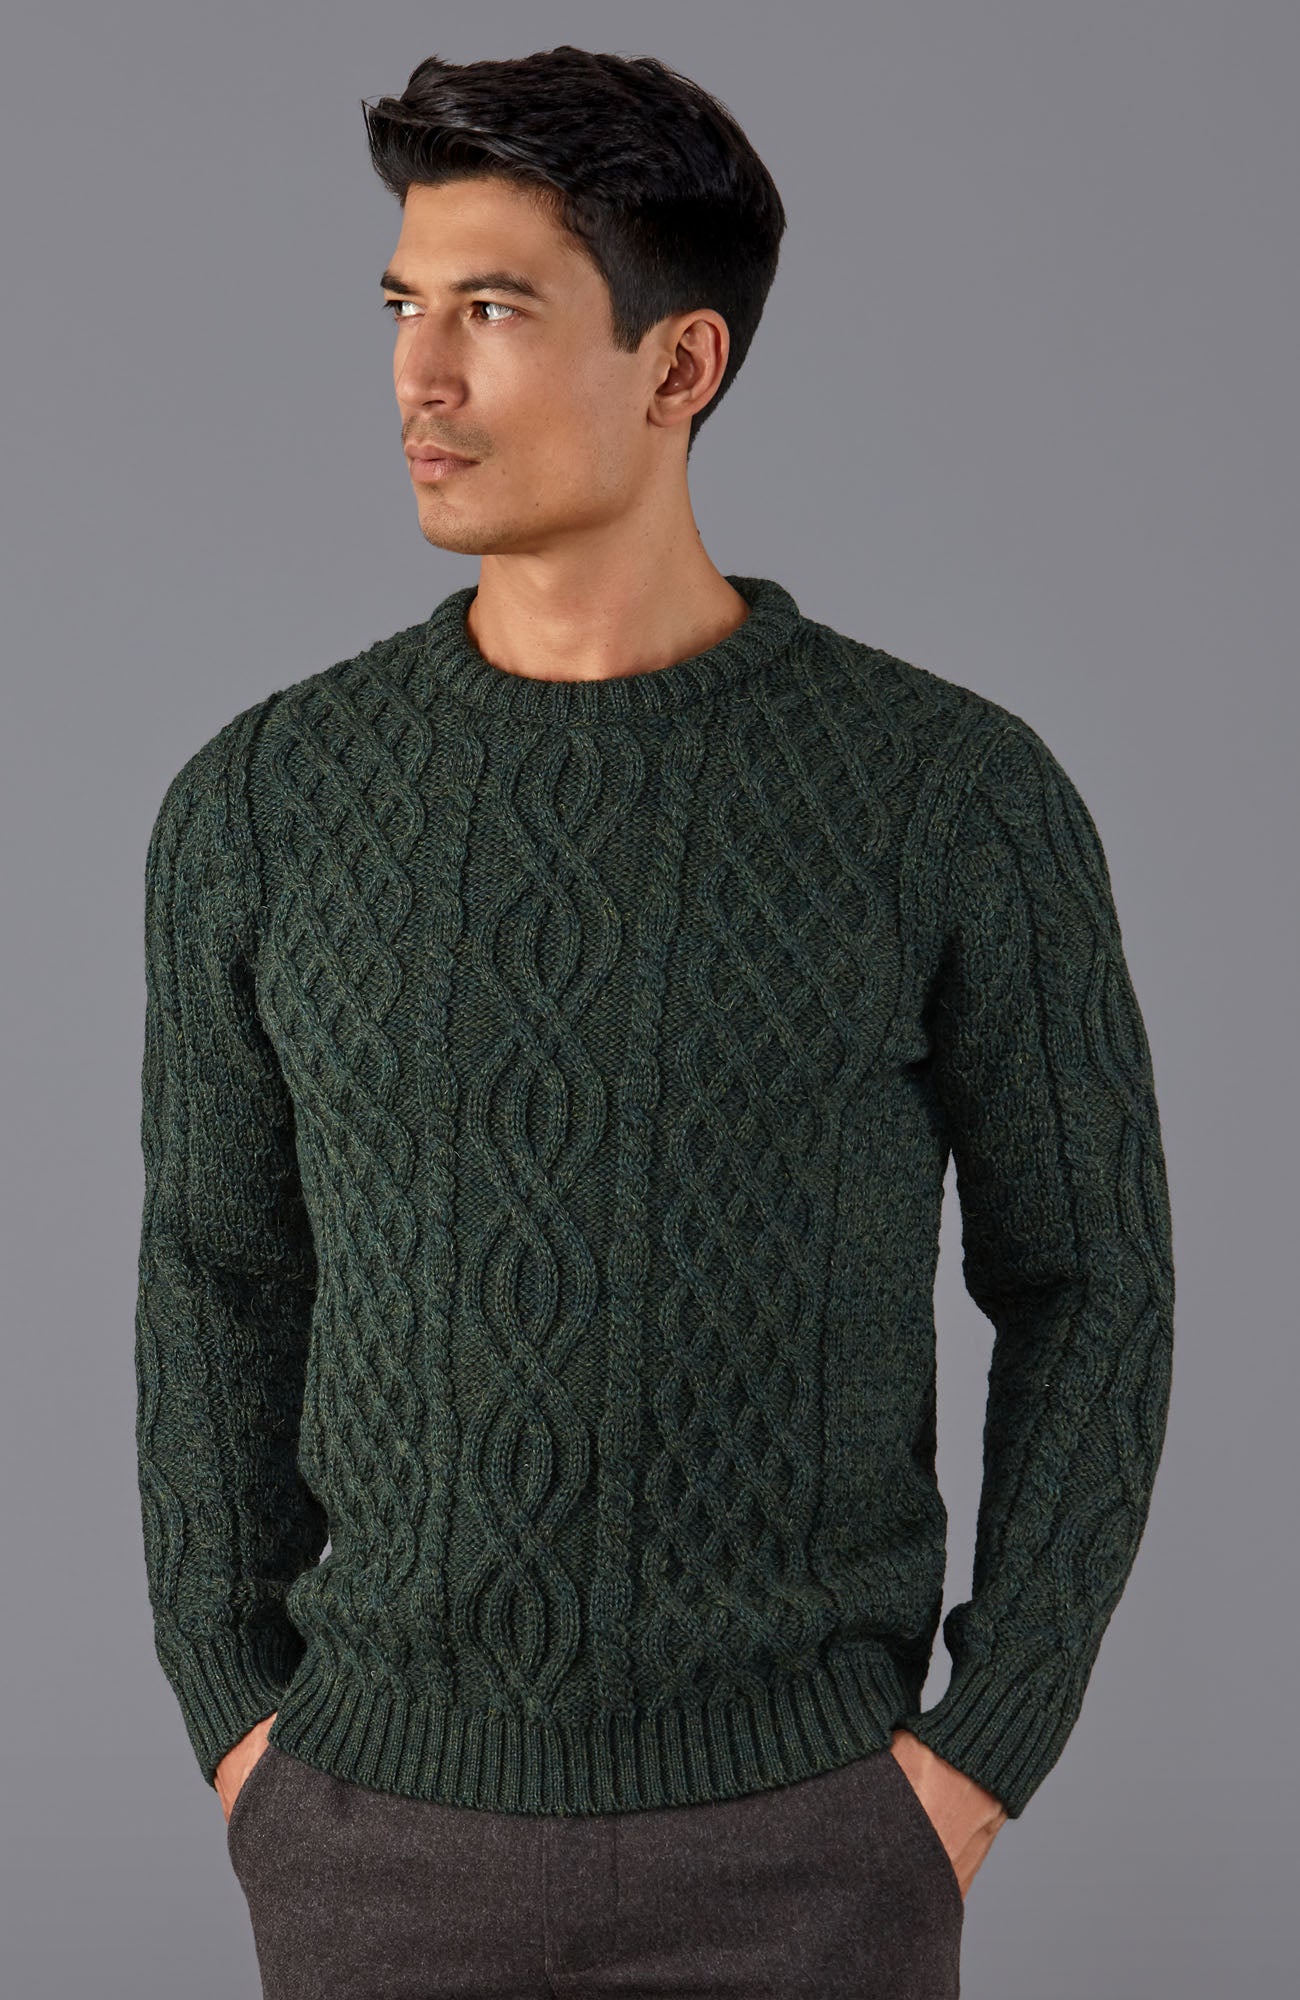 Mens Chunky Cable Sweater - 100% British Wool – Paul James Knitwear